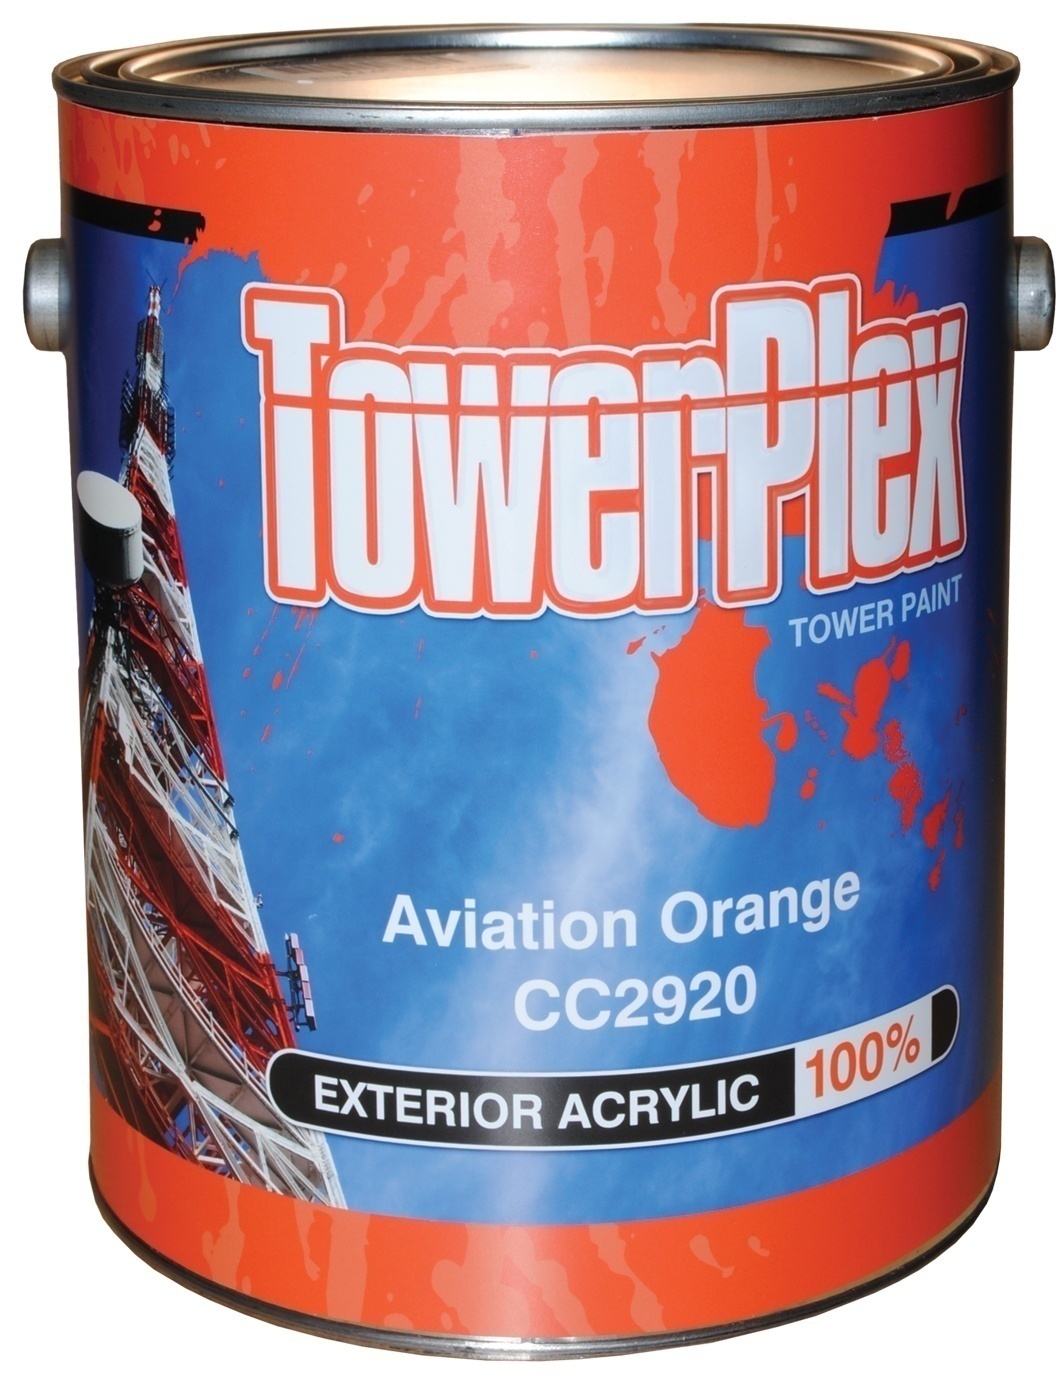 CC2920 TowerPlex Aviation Orange Tower Paint (5 Gallons) from GME Supply